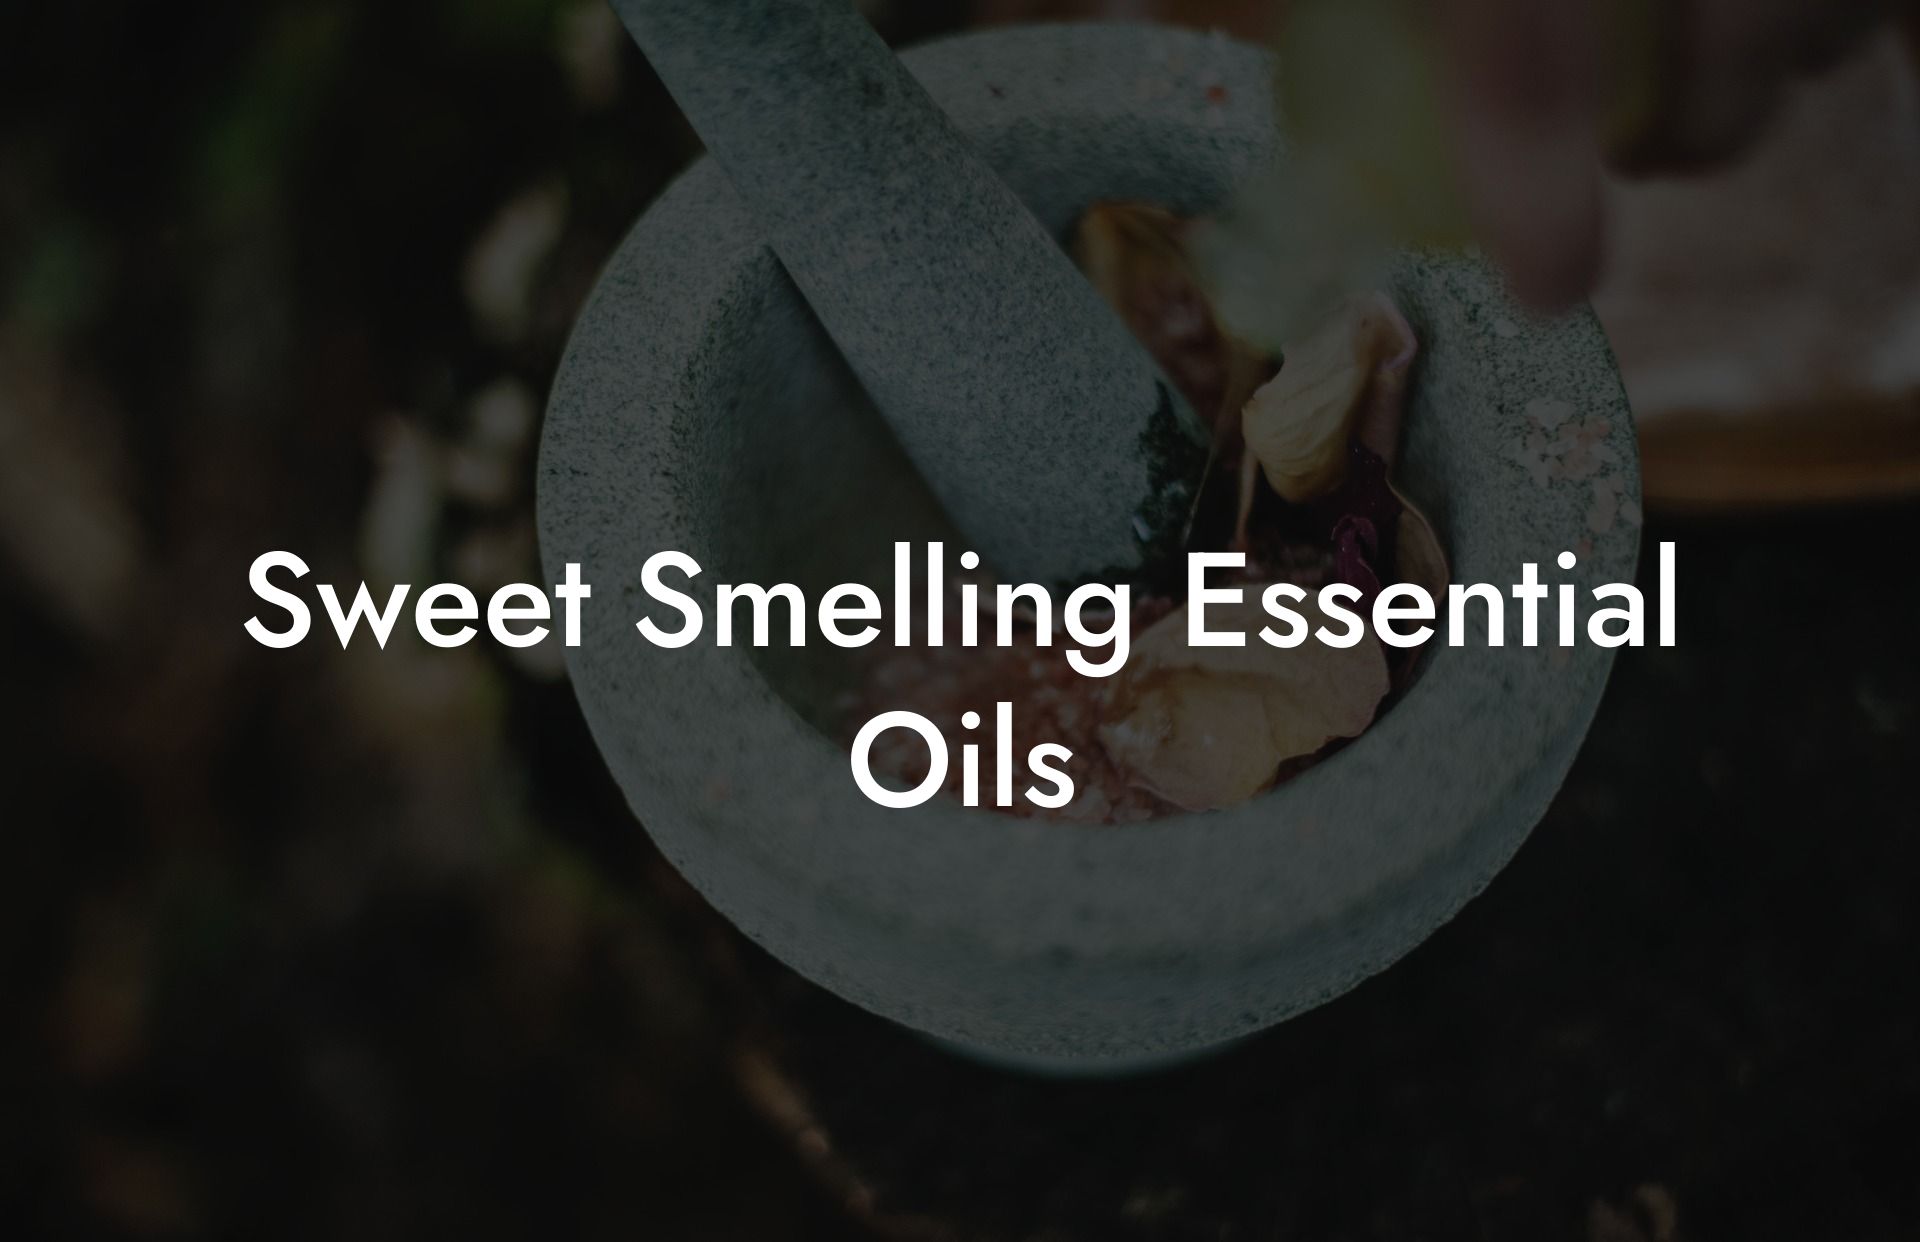 Sweet Smelling Essential Oils